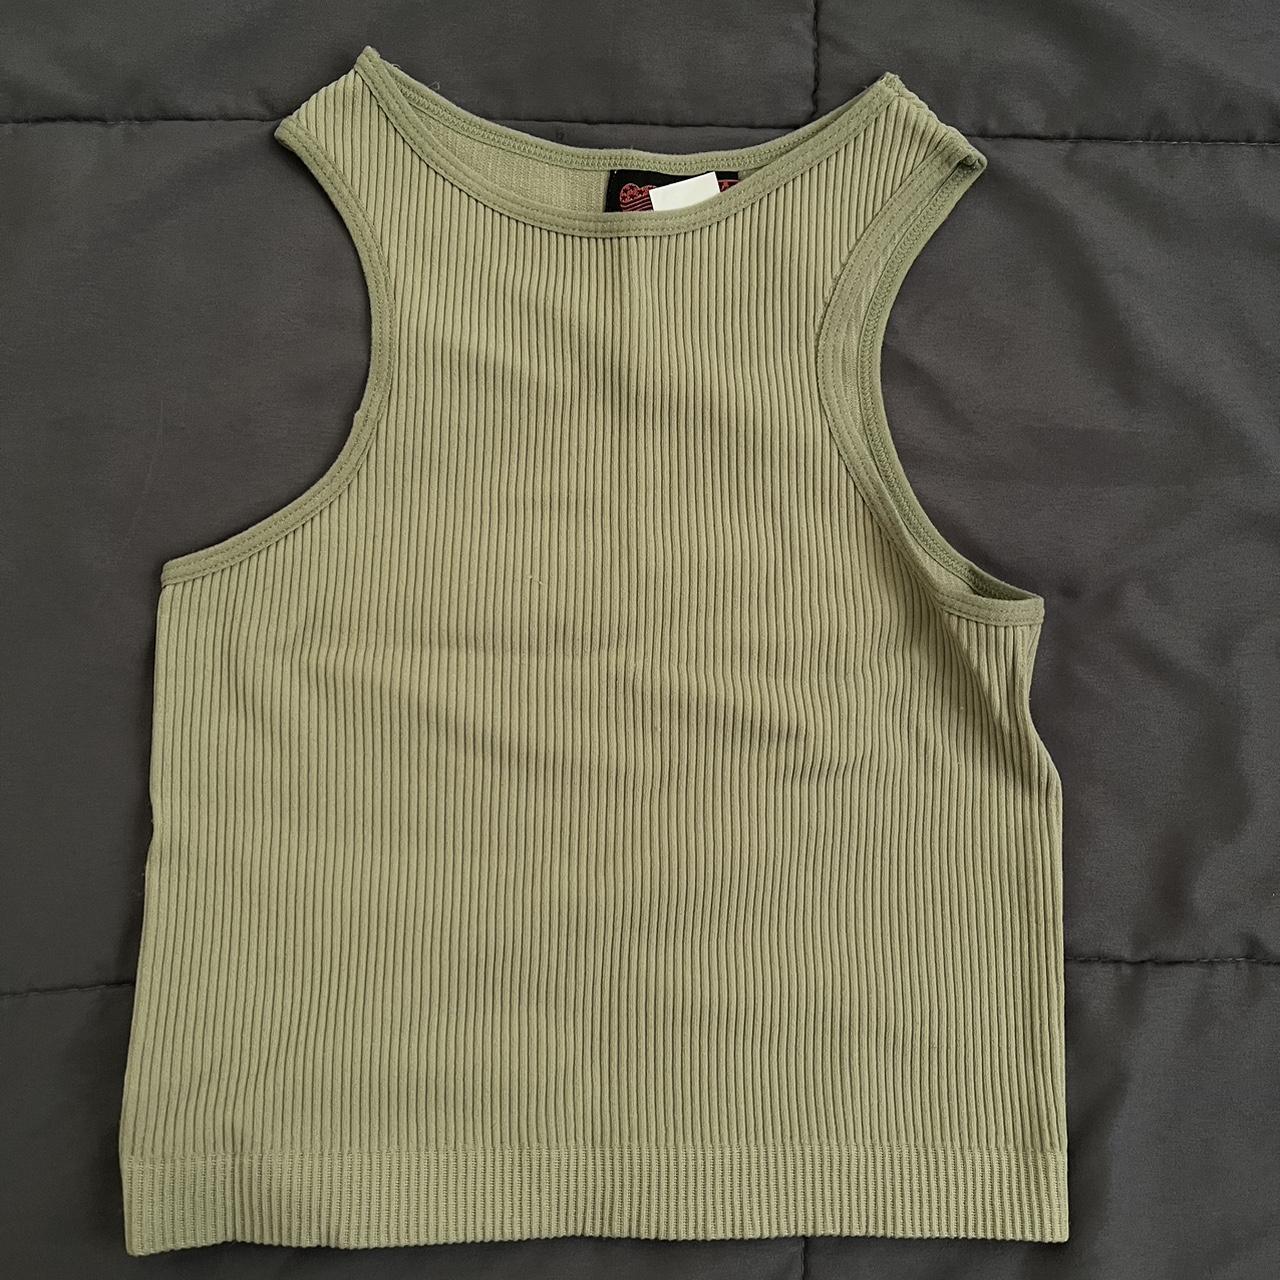 Green top 🪴 Can fit a small & medium ! Stretchy &... - Depop